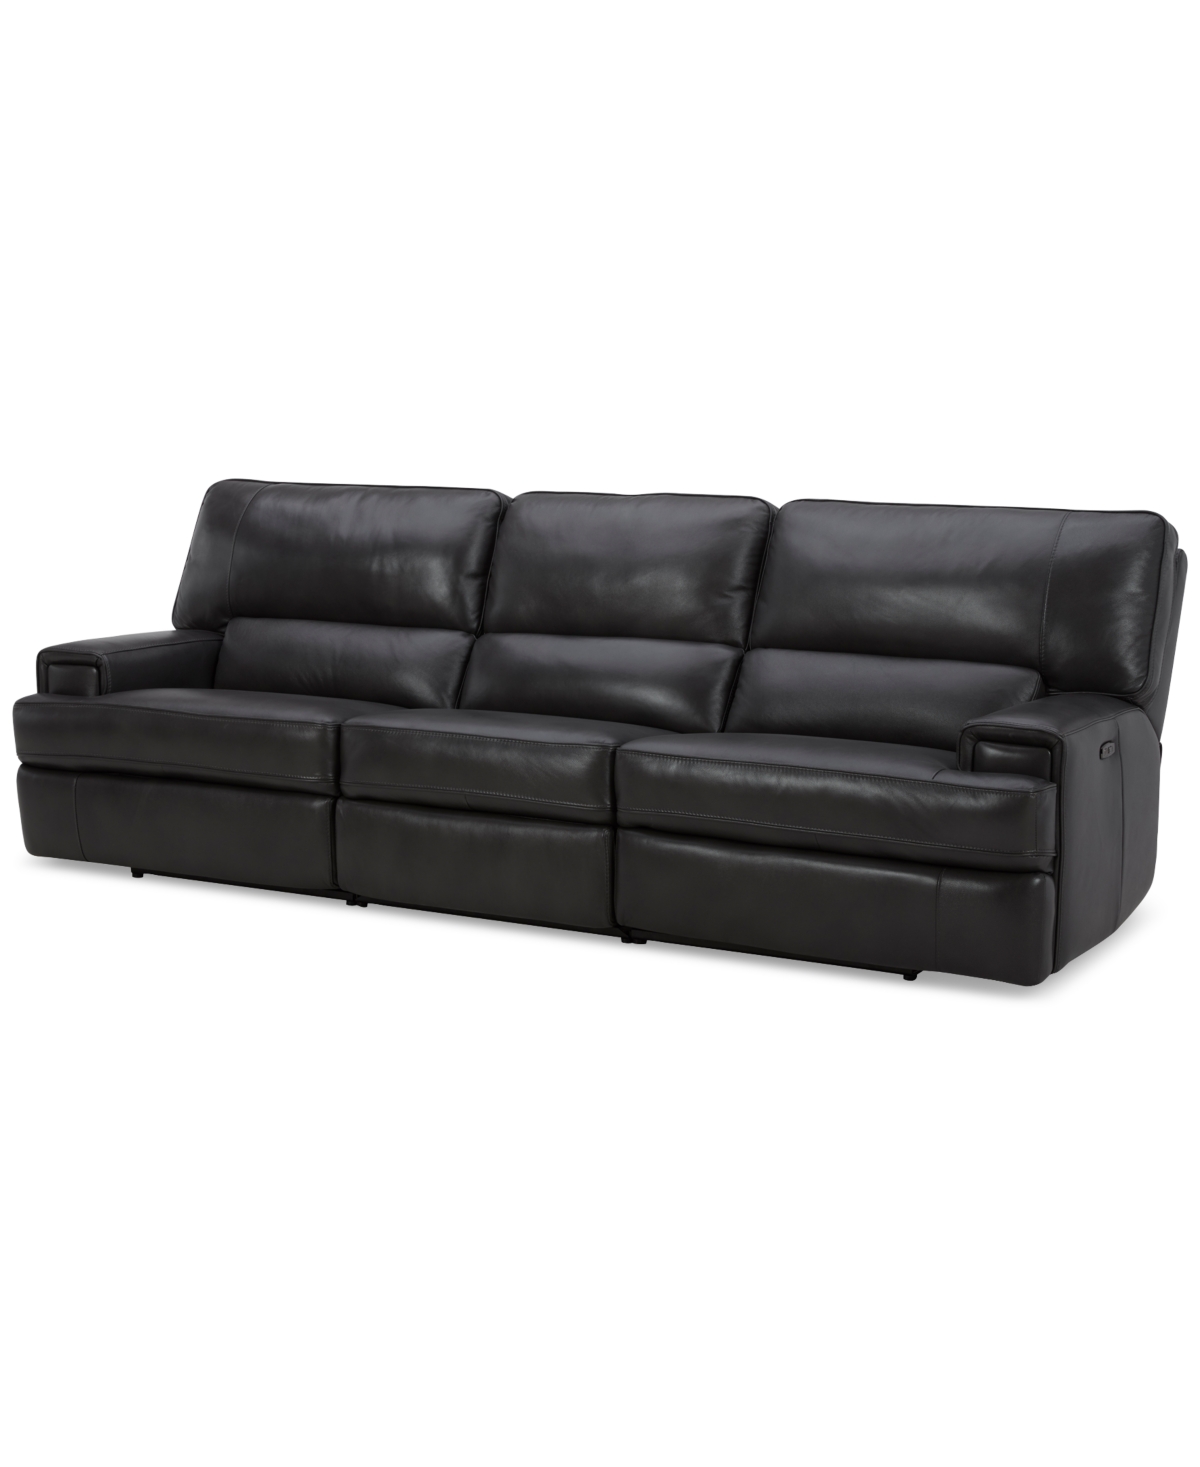 Furniture Binardo 118" 3 Pc Zero Gravity Leather Sectional With 2 Power Recliners, Created For Macy's In Charcoal